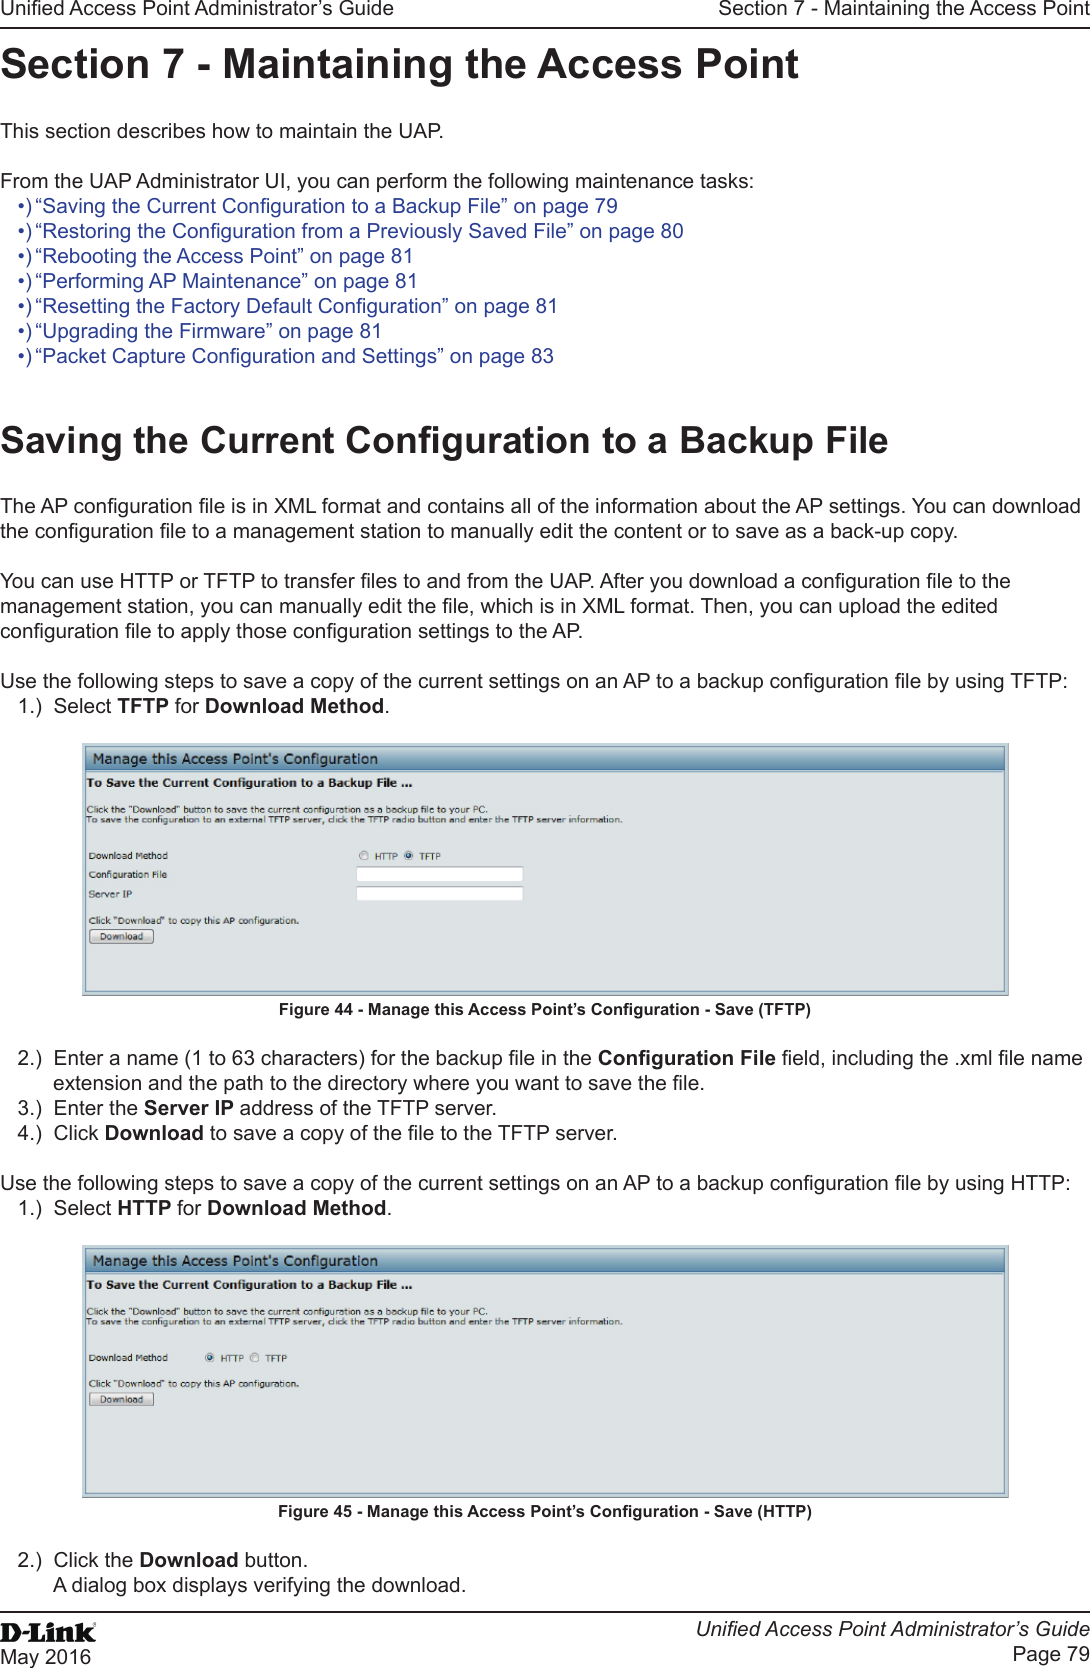 Unied Access Point Administrator’s GuideUnied Access Point Administrator’s GuidePage 79May 2016Section 7 - Maintaining the Access PointSection 7 - Maintaining the Access PointThis section describes how to maintain the UAP.From the UAP Administrator UI, you can perform the following maintenance tasks:•) “Saving the Current Conguration to a Backup File” on page 79•) “Restoring the Conguration from a Previously Saved File” on page 80•) “Rebooting the Access Point” on page 81•) “Performing AP Maintenance” on page 81•) “Resetting the Factory Default Conguration” on page 81•) “Upgrading the Firmware” on page 81•) “Packet Capture Conguration and Settings” on page 83Saving the Current Conguration to a Backup FileThe AP conguration le is in XML format and contains all of the information about the AP settings. You can download the conguration le to a management station to manually edit the content or to save as a back-up copy. You can use HTTP or TFTP to transfer les to and from the UAP. After you download a conguration le to the management station, you can manually edit the le, which is in XML format. Then, you can upload the edited conguration le to apply those conguration settings to the AP.Use the following steps to save a copy of the current settings on an AP to a backup conguration le by using TFTP:1.)  Select TFTP for Download Method.Figure 44 - Manage this Access Point’s Conguration - Save (TFTP)2.)  Enter a name (1 to 63 characters) for the backup le in the Conguration File eld, including the .xml le name extension and the path to the directory where you want to save the le.3.)  Enter the Server IP address of the TFTP server.4.)  Click Download to save a copy of the le to the TFTP server.Use the following steps to save a copy of the current settings on an AP to a backup conguration le by using HTTP:1.)  Select HTTP for Download Method.Figure 45 - Manage this Access Point’s Conguration - Save (HTTP)2.)  Click the Download button.A dialog box displays verifying the download.